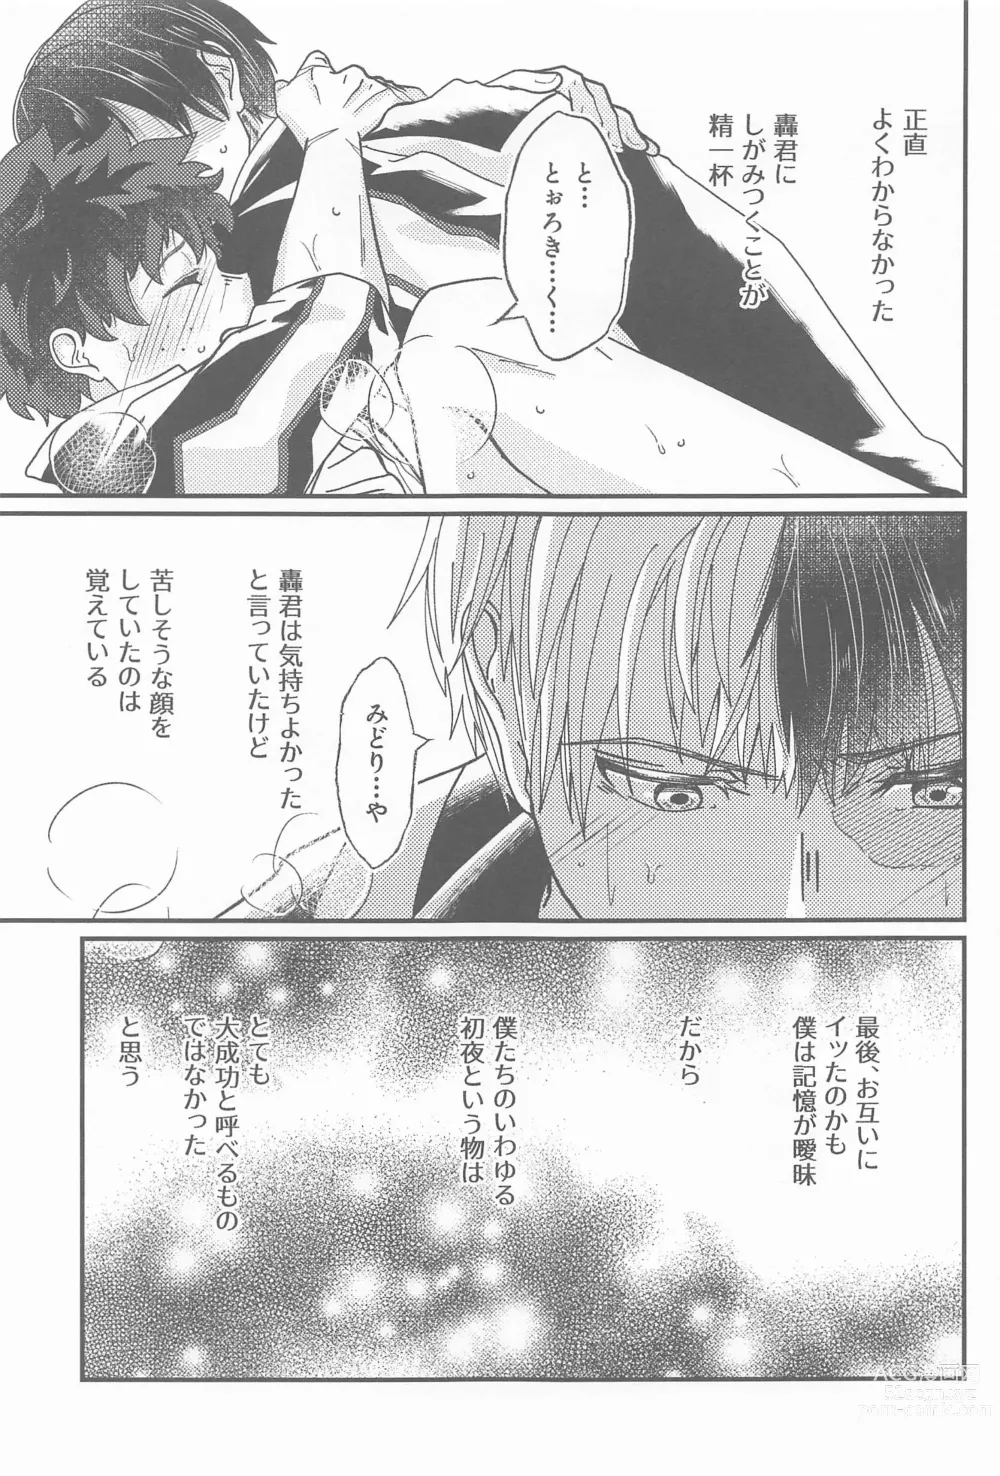 Page 4 of doujinshi Second Sweet